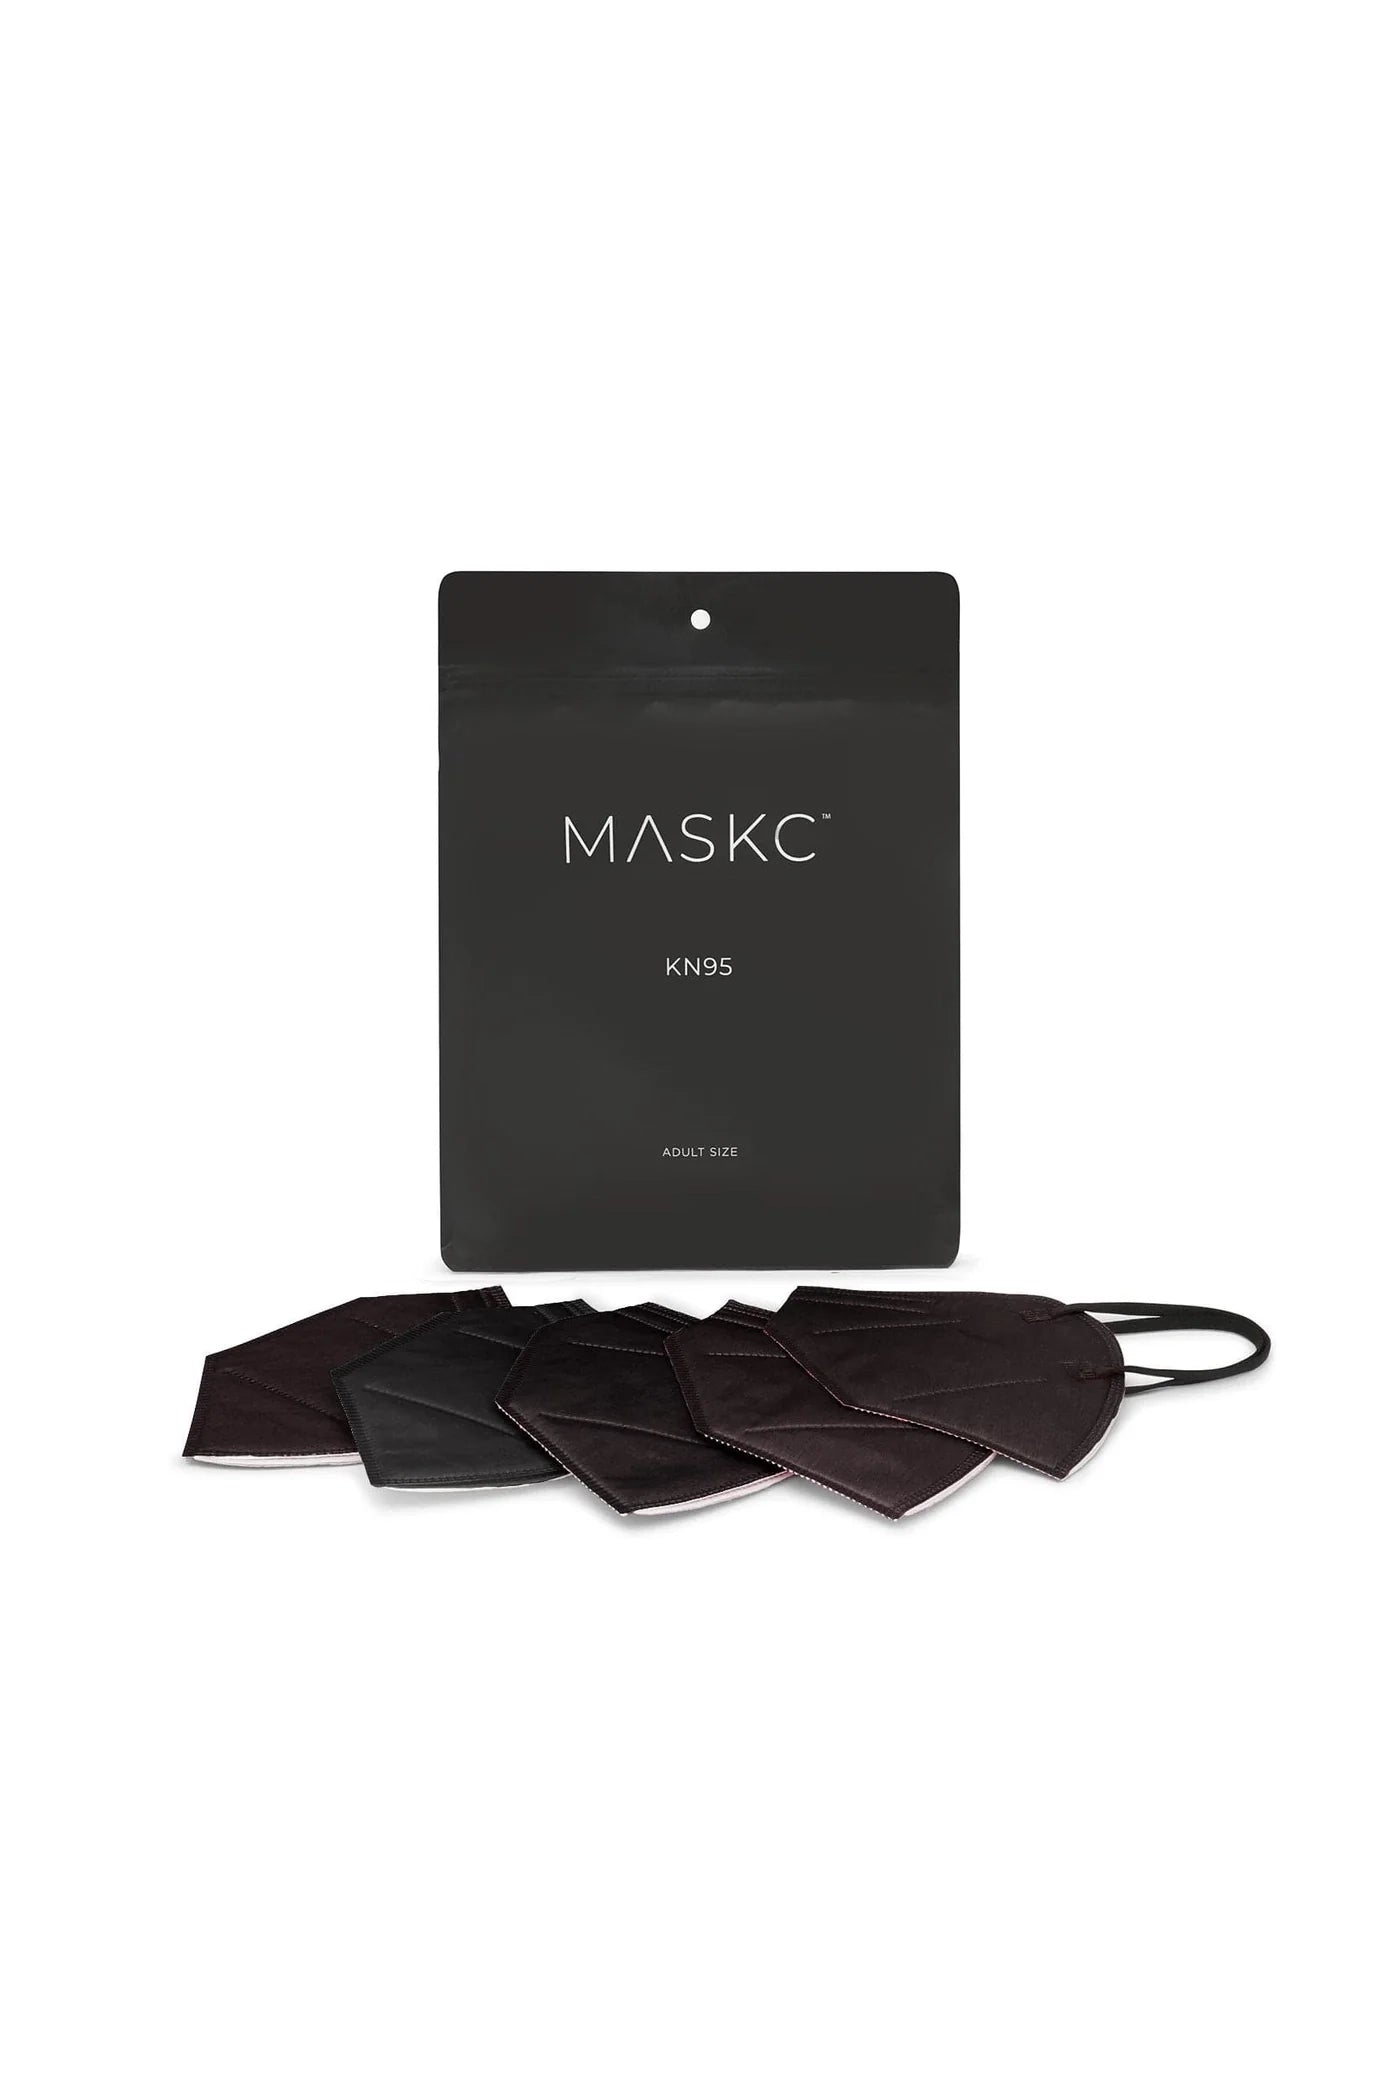 Pack of Black KN95 face masks. Each pack contains stylish high quality face masks. 